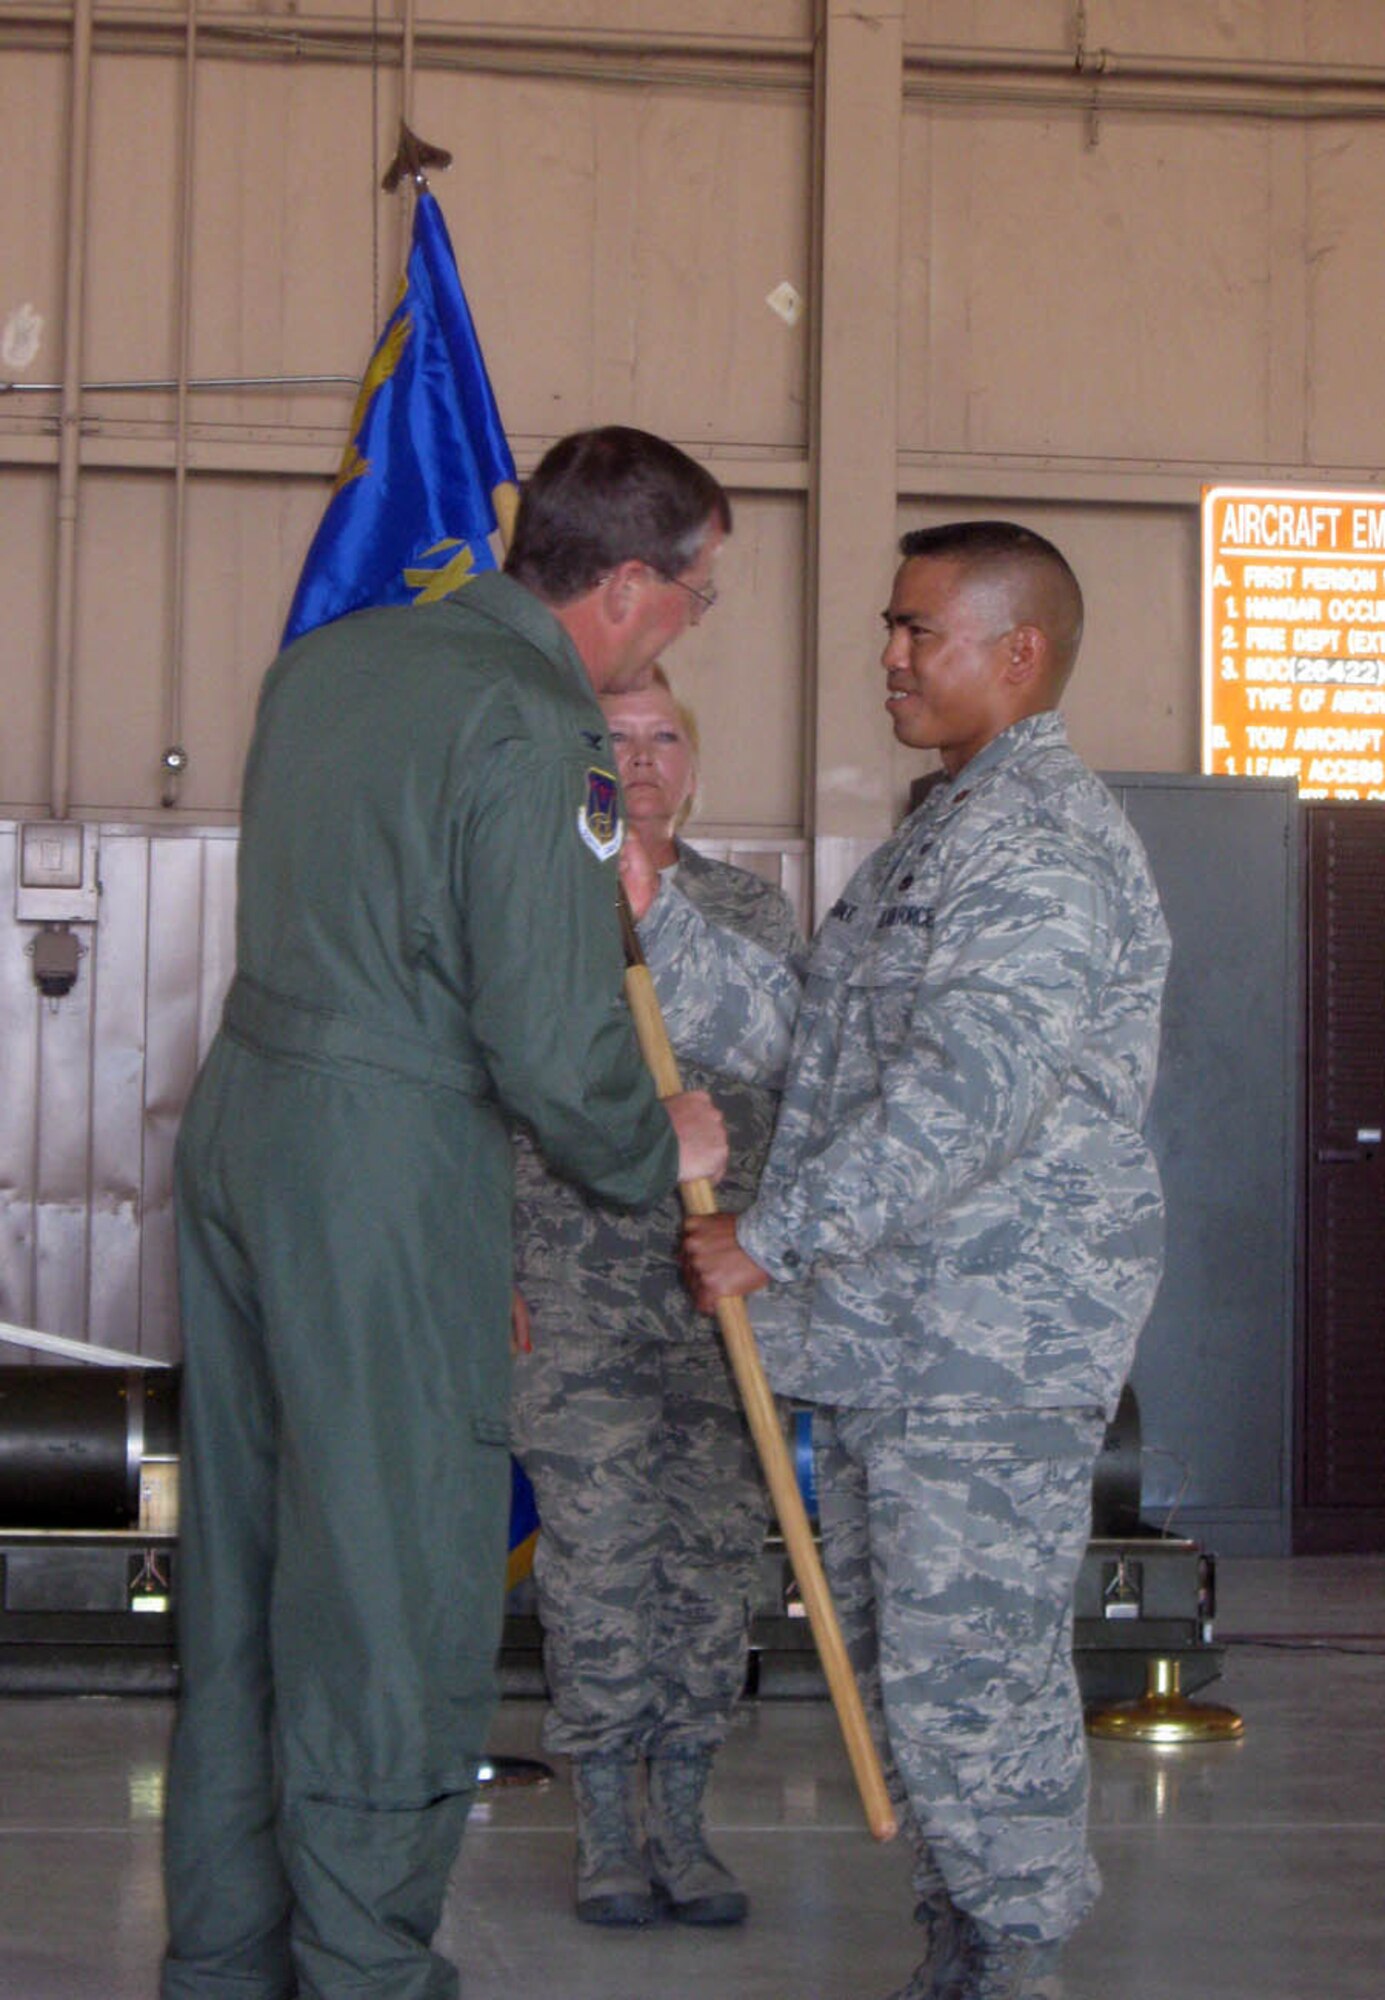 Maj. Michael Egbalic (right), accepts the 926th Aircraft Maintenance Squadron guideon from Col. David Culbertson, 926th Group commander, as he takes command of the newly-activated U.S. Air Force Reserve squadron May 15. Through the Air Force's Total Force Integration initiative, the squadron's members work on F-15, F-16 and F-22 aircraft within Regular Air Force units.